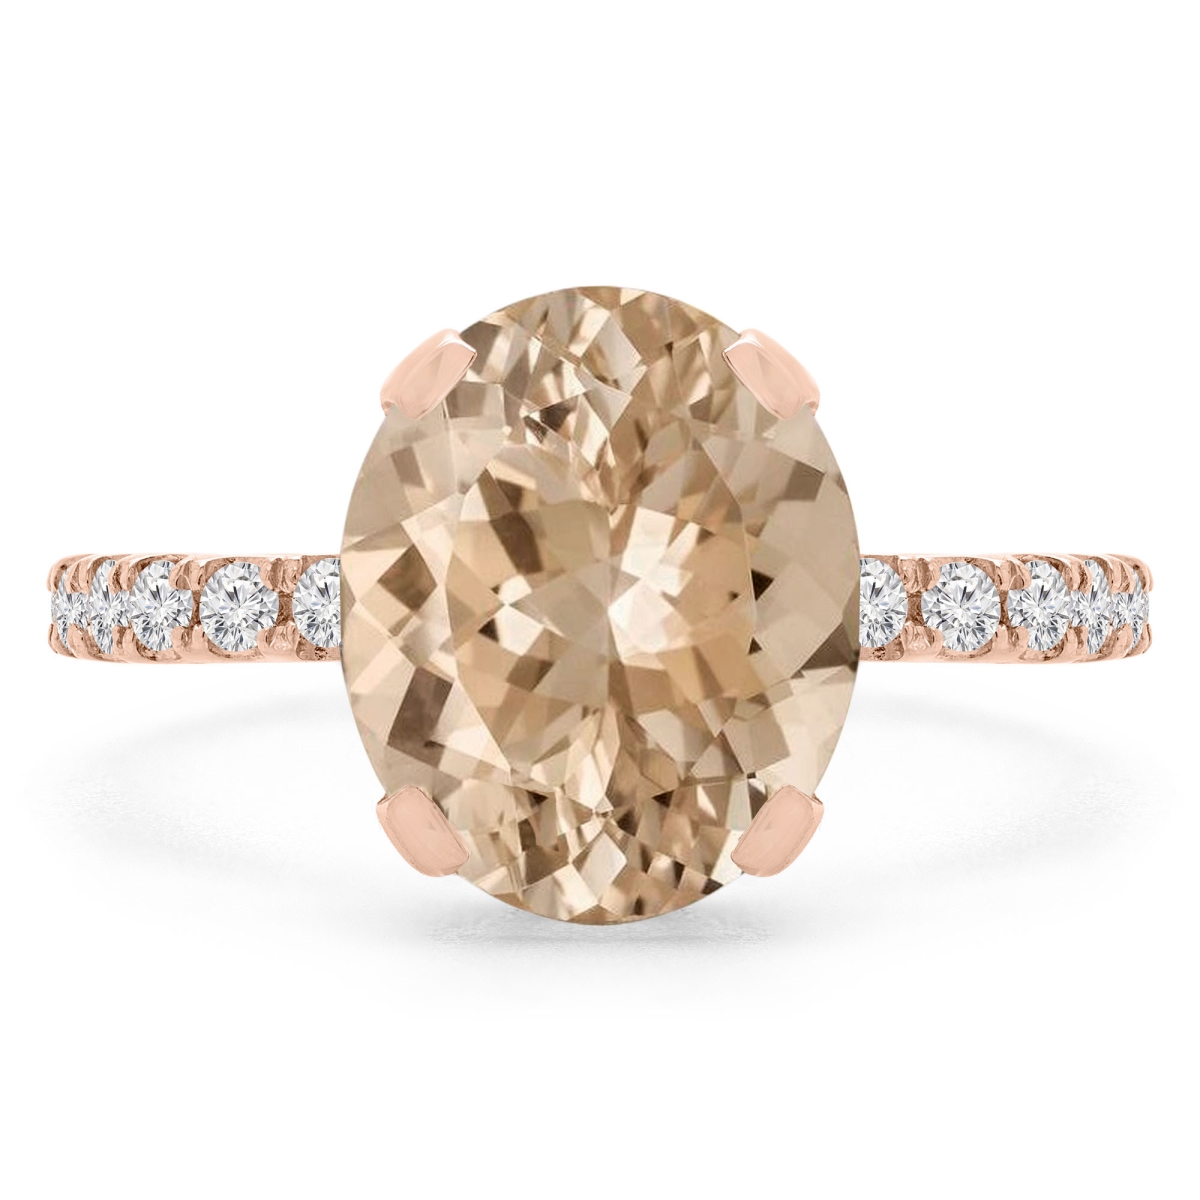 Picture of Majesty Diamonds MD190407-7.5 3.4 CTW Oval Pink Morganite Under Halo Engagement Ring in 14K Rose Gold - Size 7.5